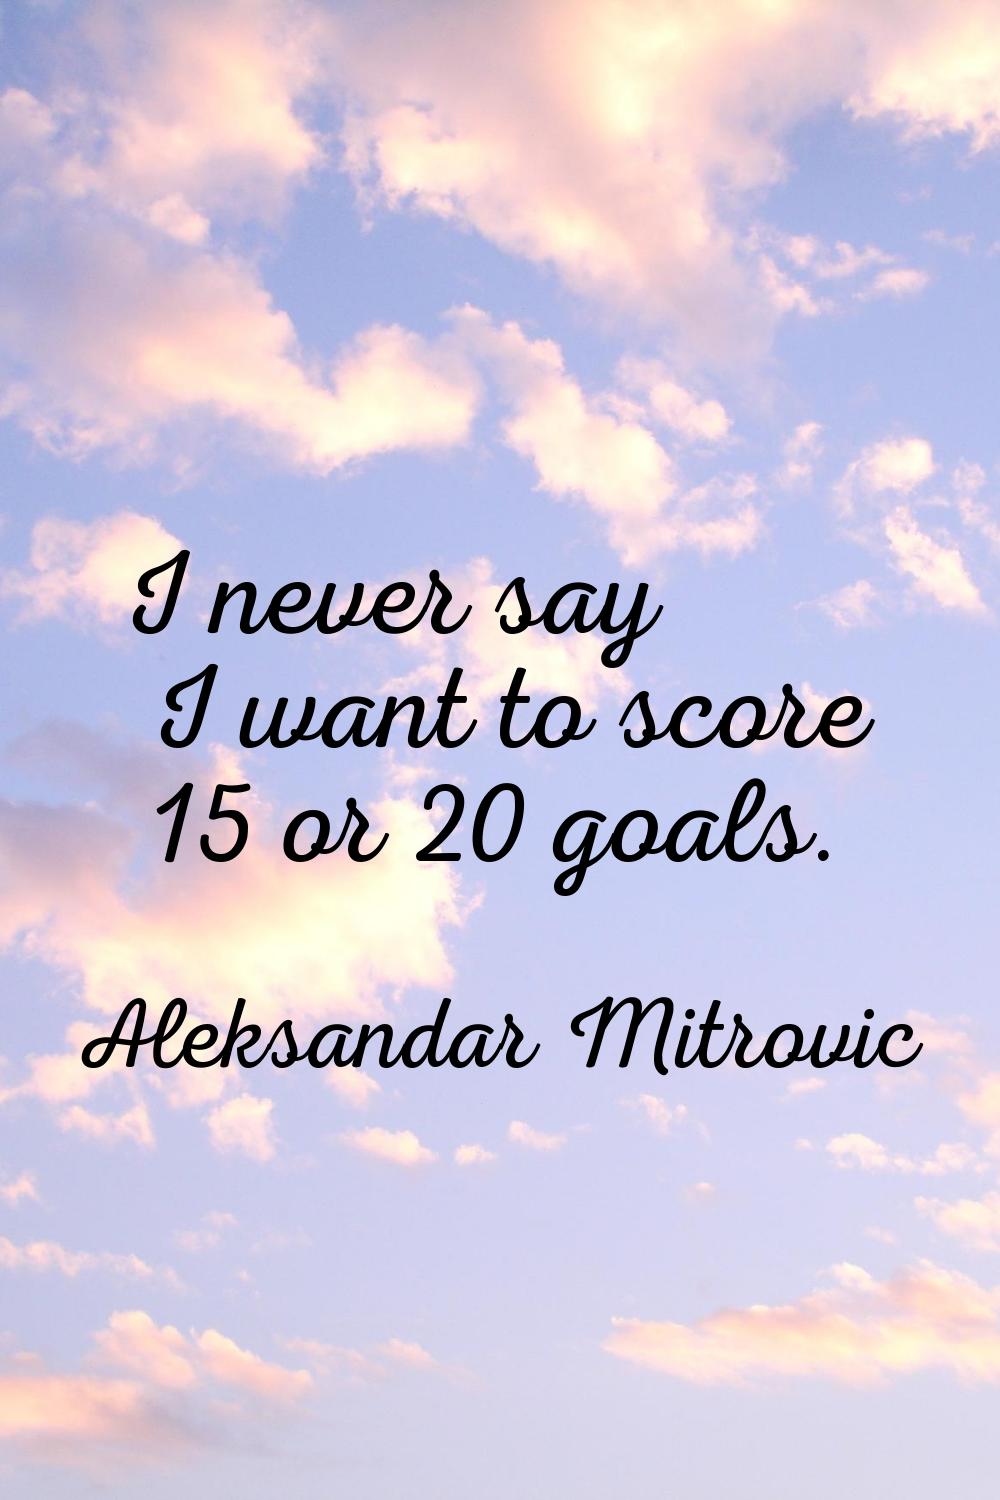 I never say I want to score 15 or 20 goals.